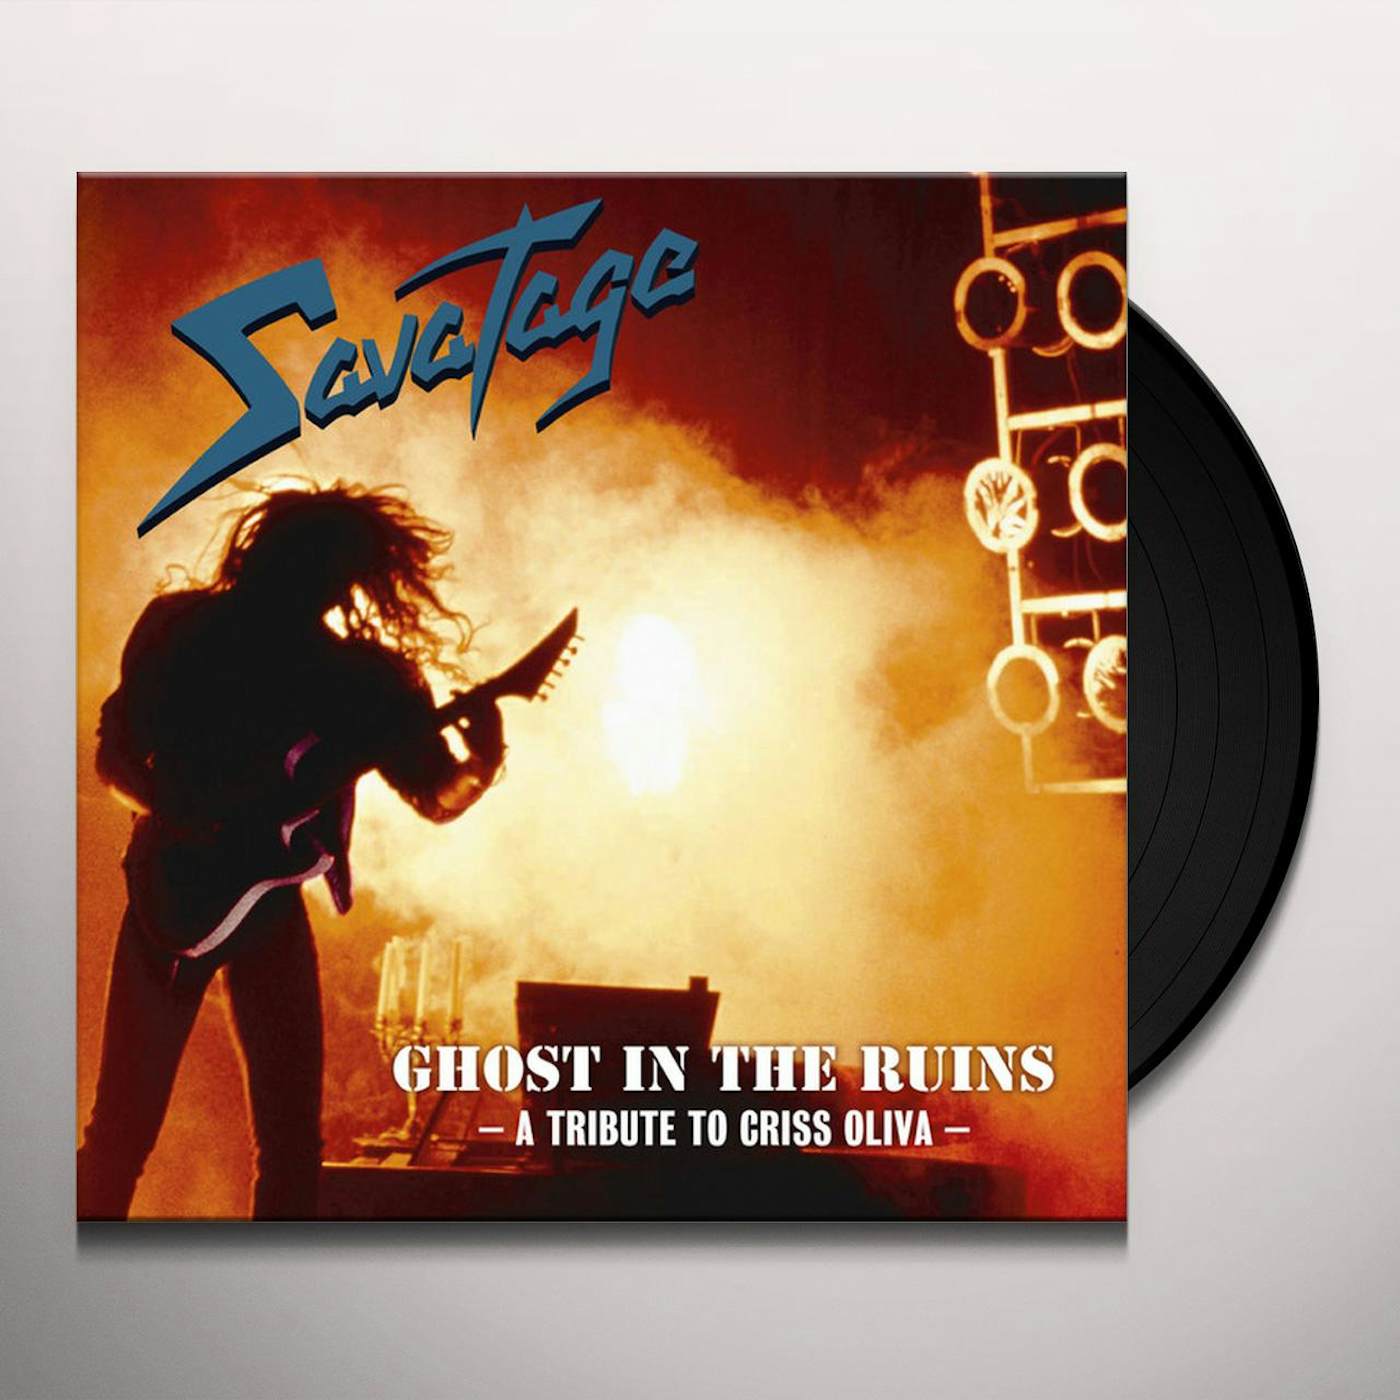 Savatage GHOST IN THE RUINS Vinyl Record